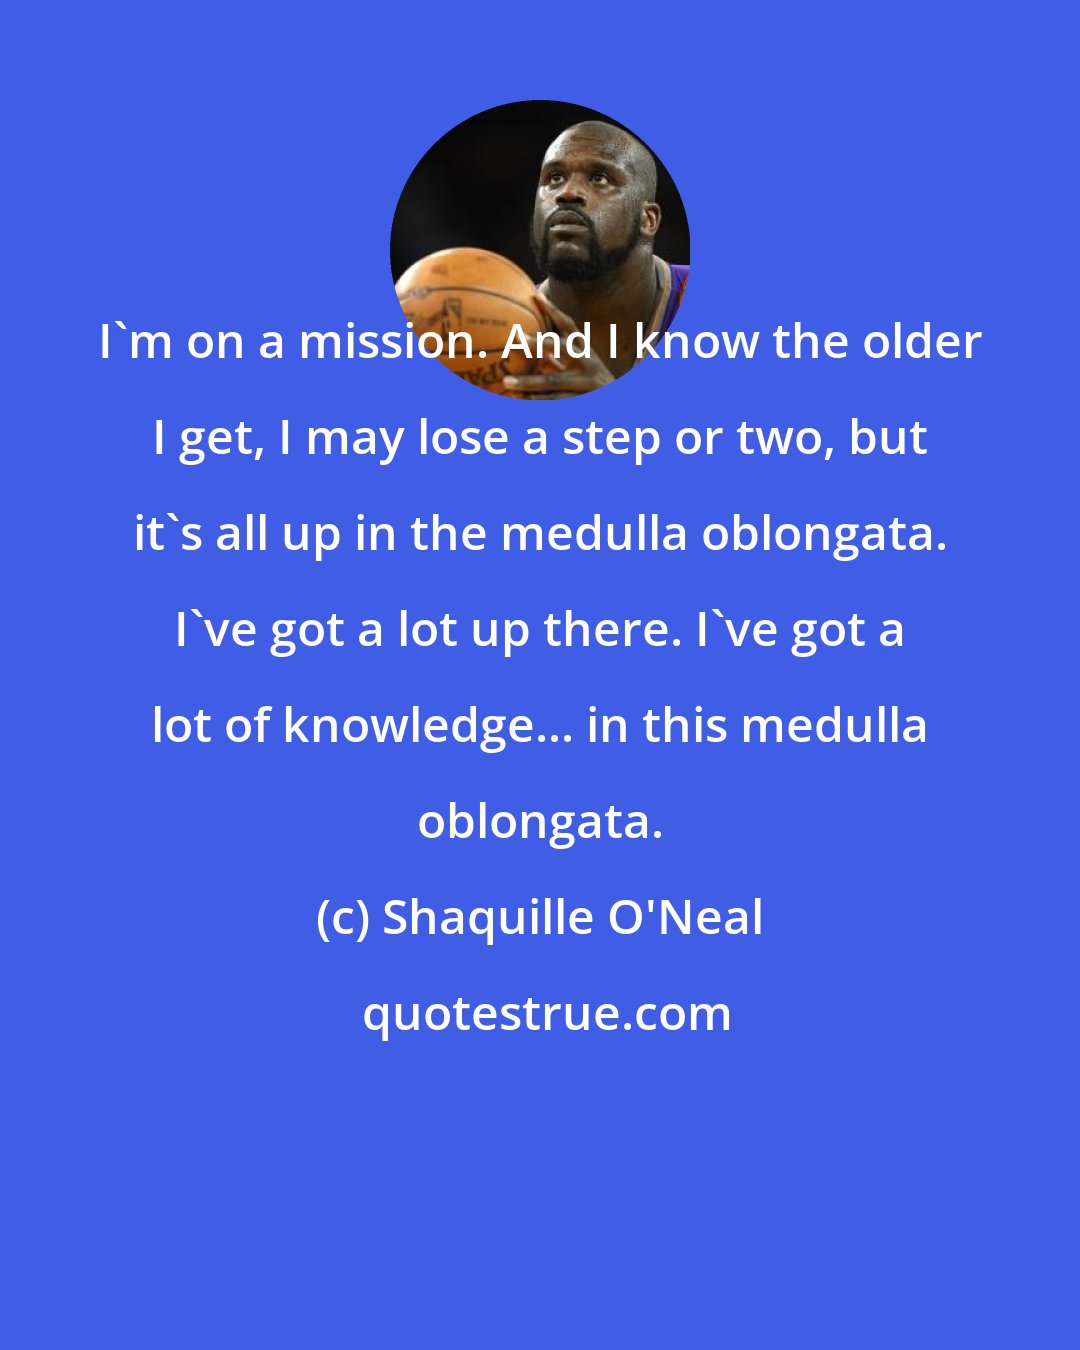 Shaquille O'Neal: I'm on a mission. And I know the older I get, I may lose a step or two, but it's all up in the medulla oblongata. I've got a lot up there. I've got a lot of knowledge... in this medulla oblongata.